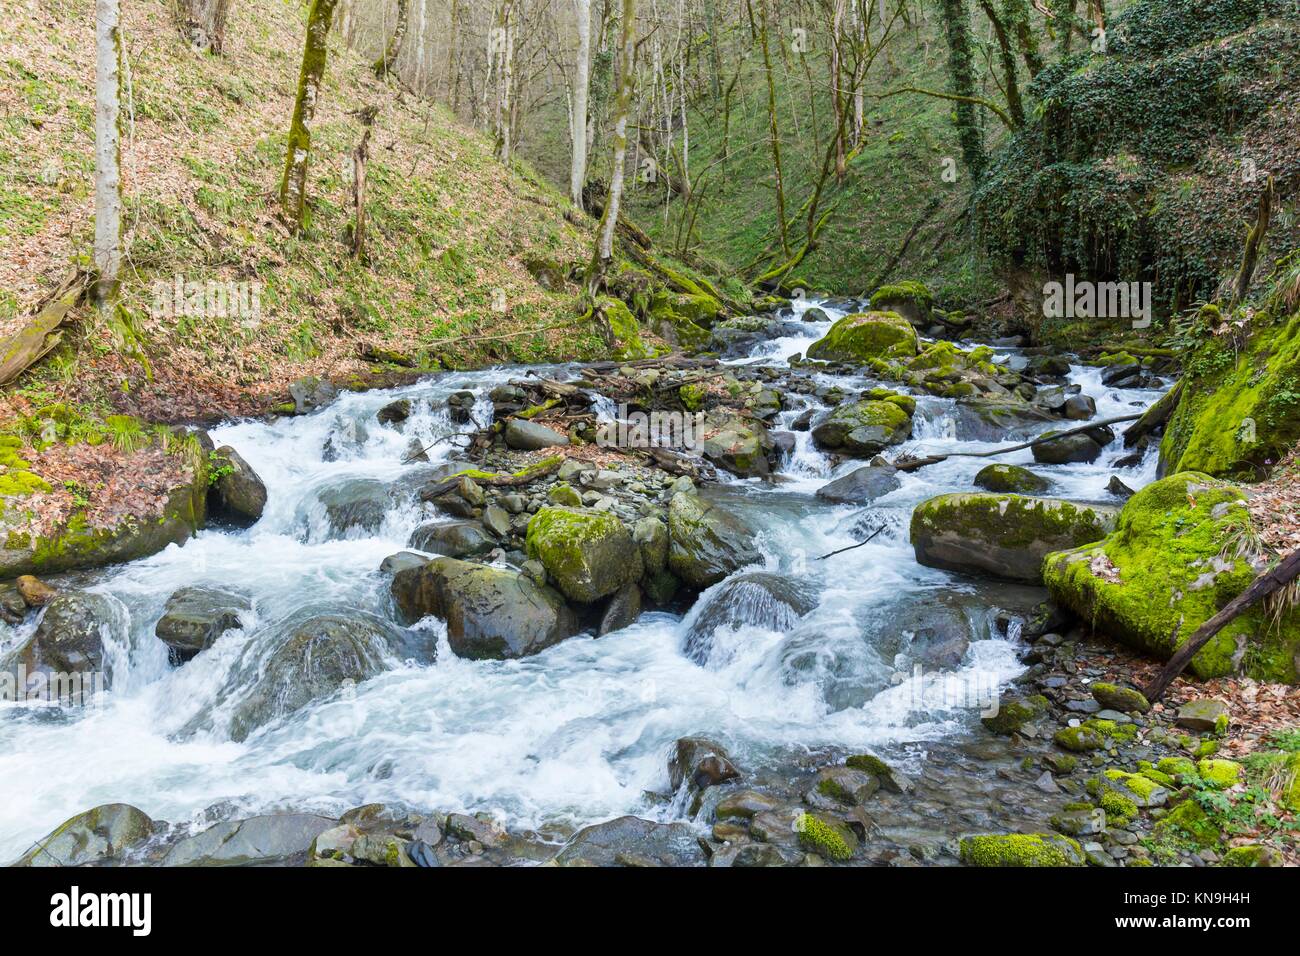 View of mountain forest river at the spring season. Stock Photo